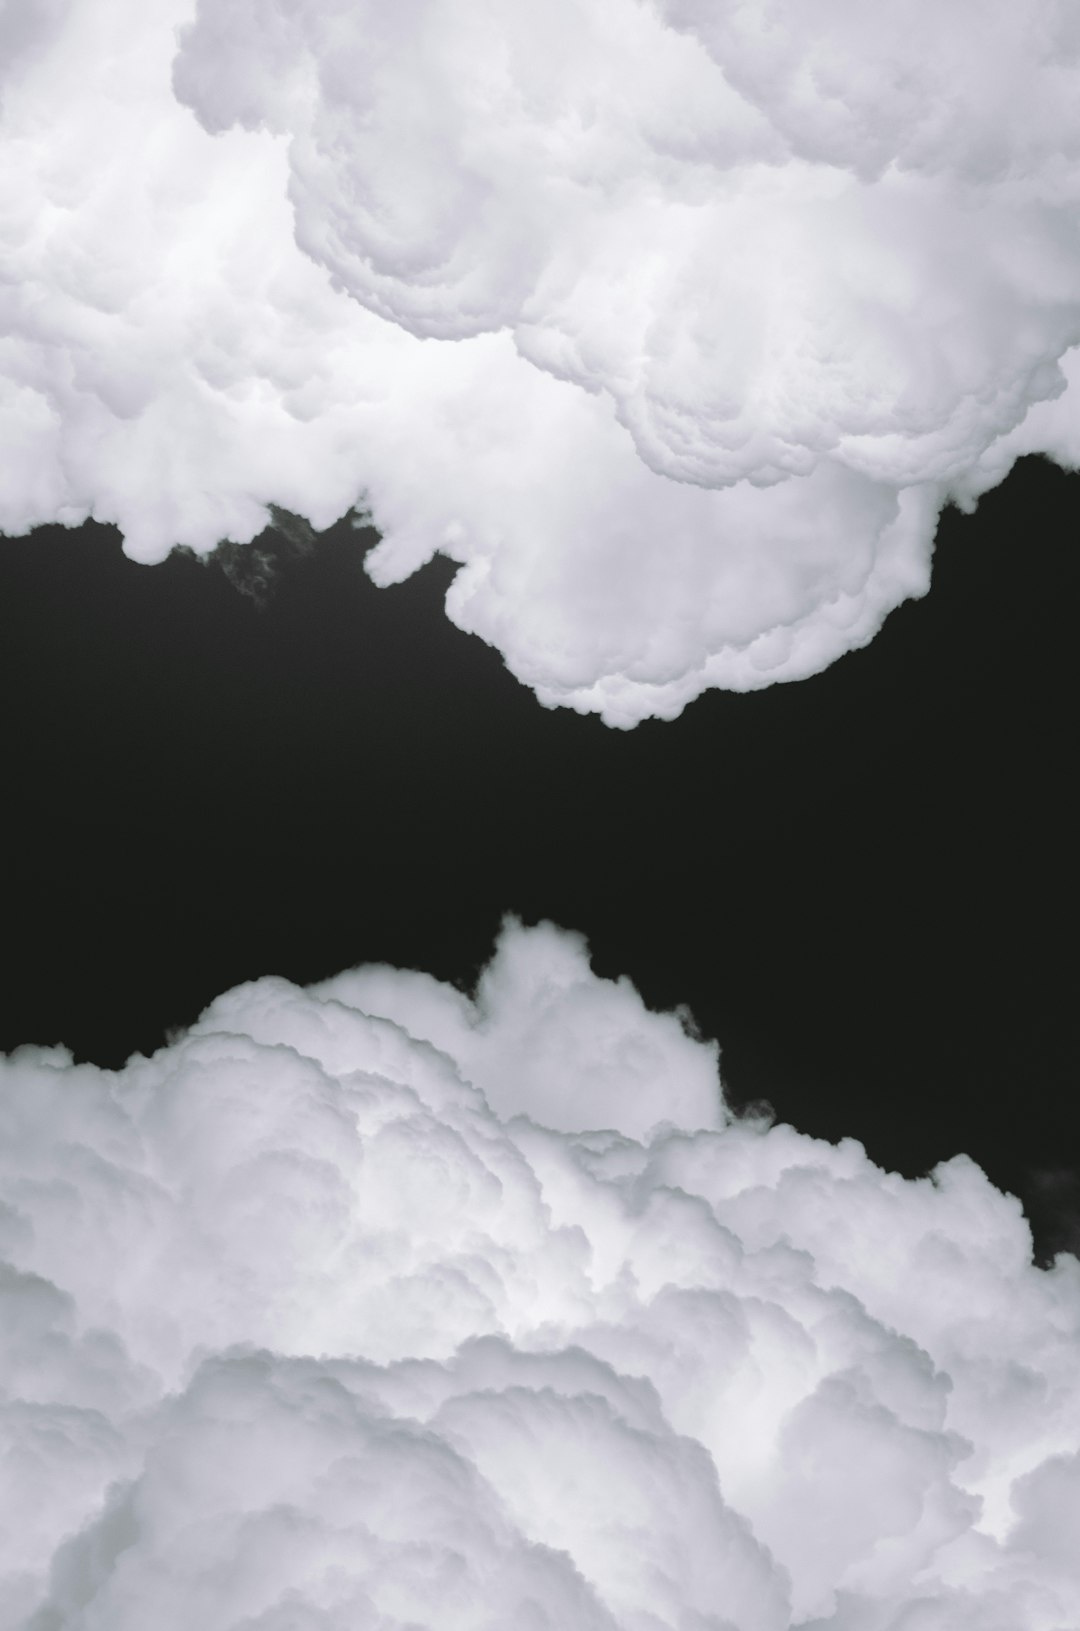 White clouds on a black background, hyper realistic close up photography in the style of realism. –ar 21:32